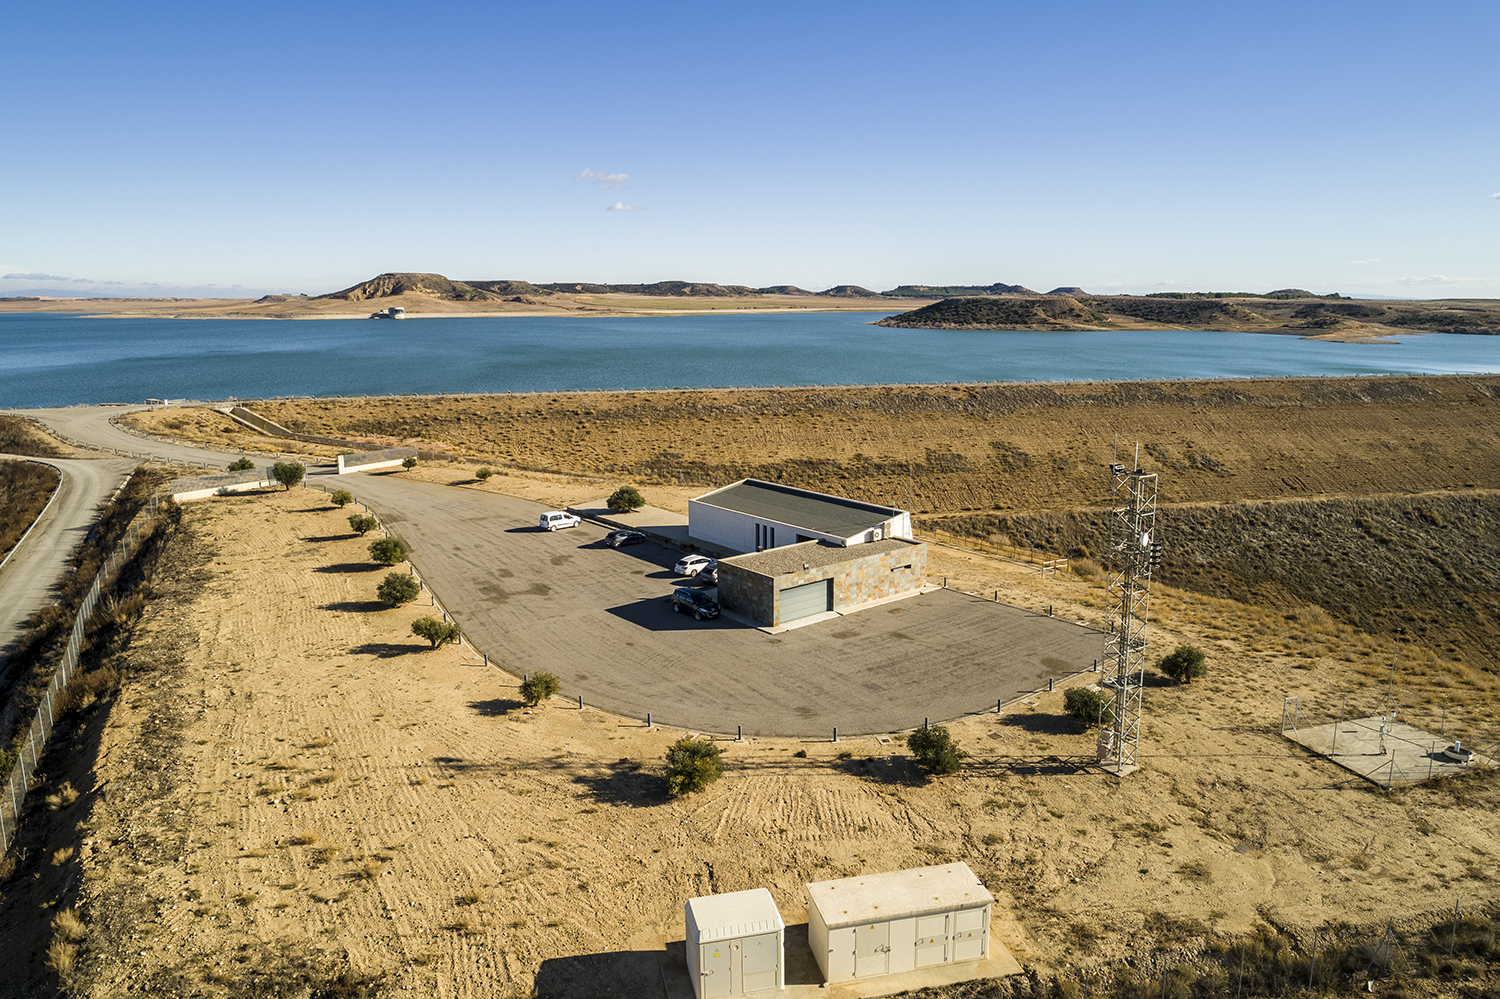 For the owners of the San Salavador reservoir project, operational efficiency was the top priority to ensure that annual running costs were kept to a minimum.